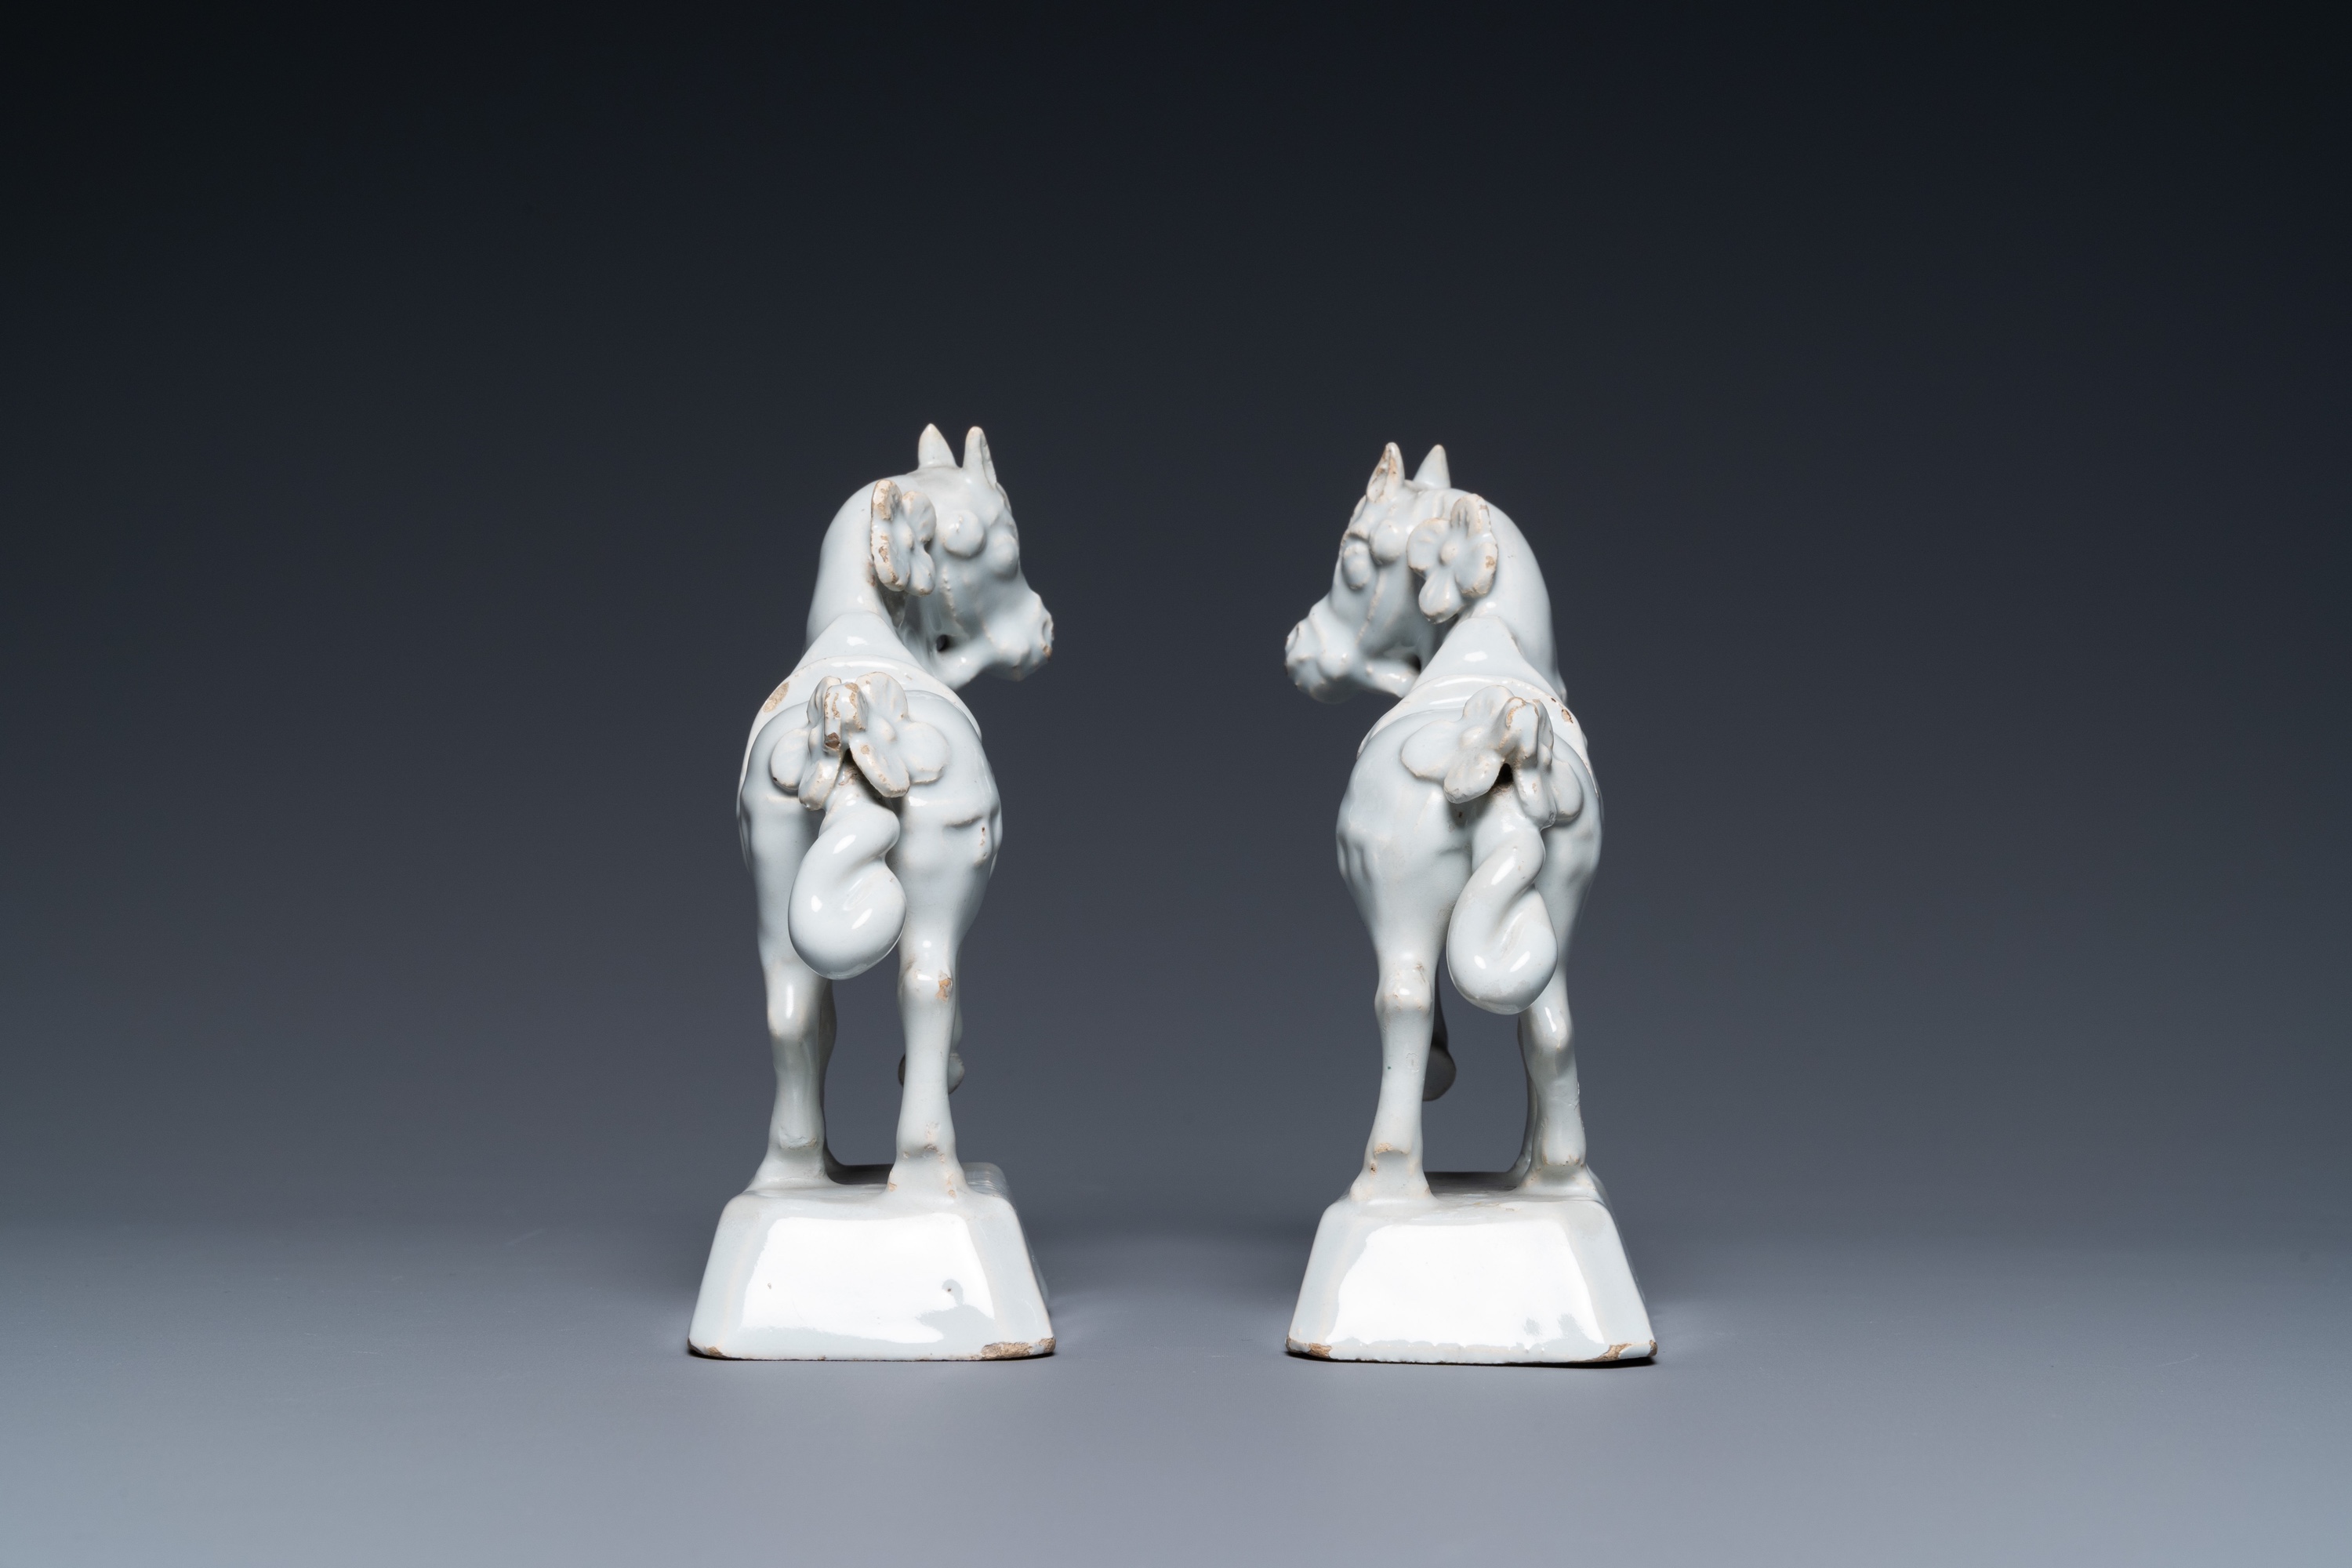 A pair of white Dutch Delft horses, 18th C. - Image 5 of 7